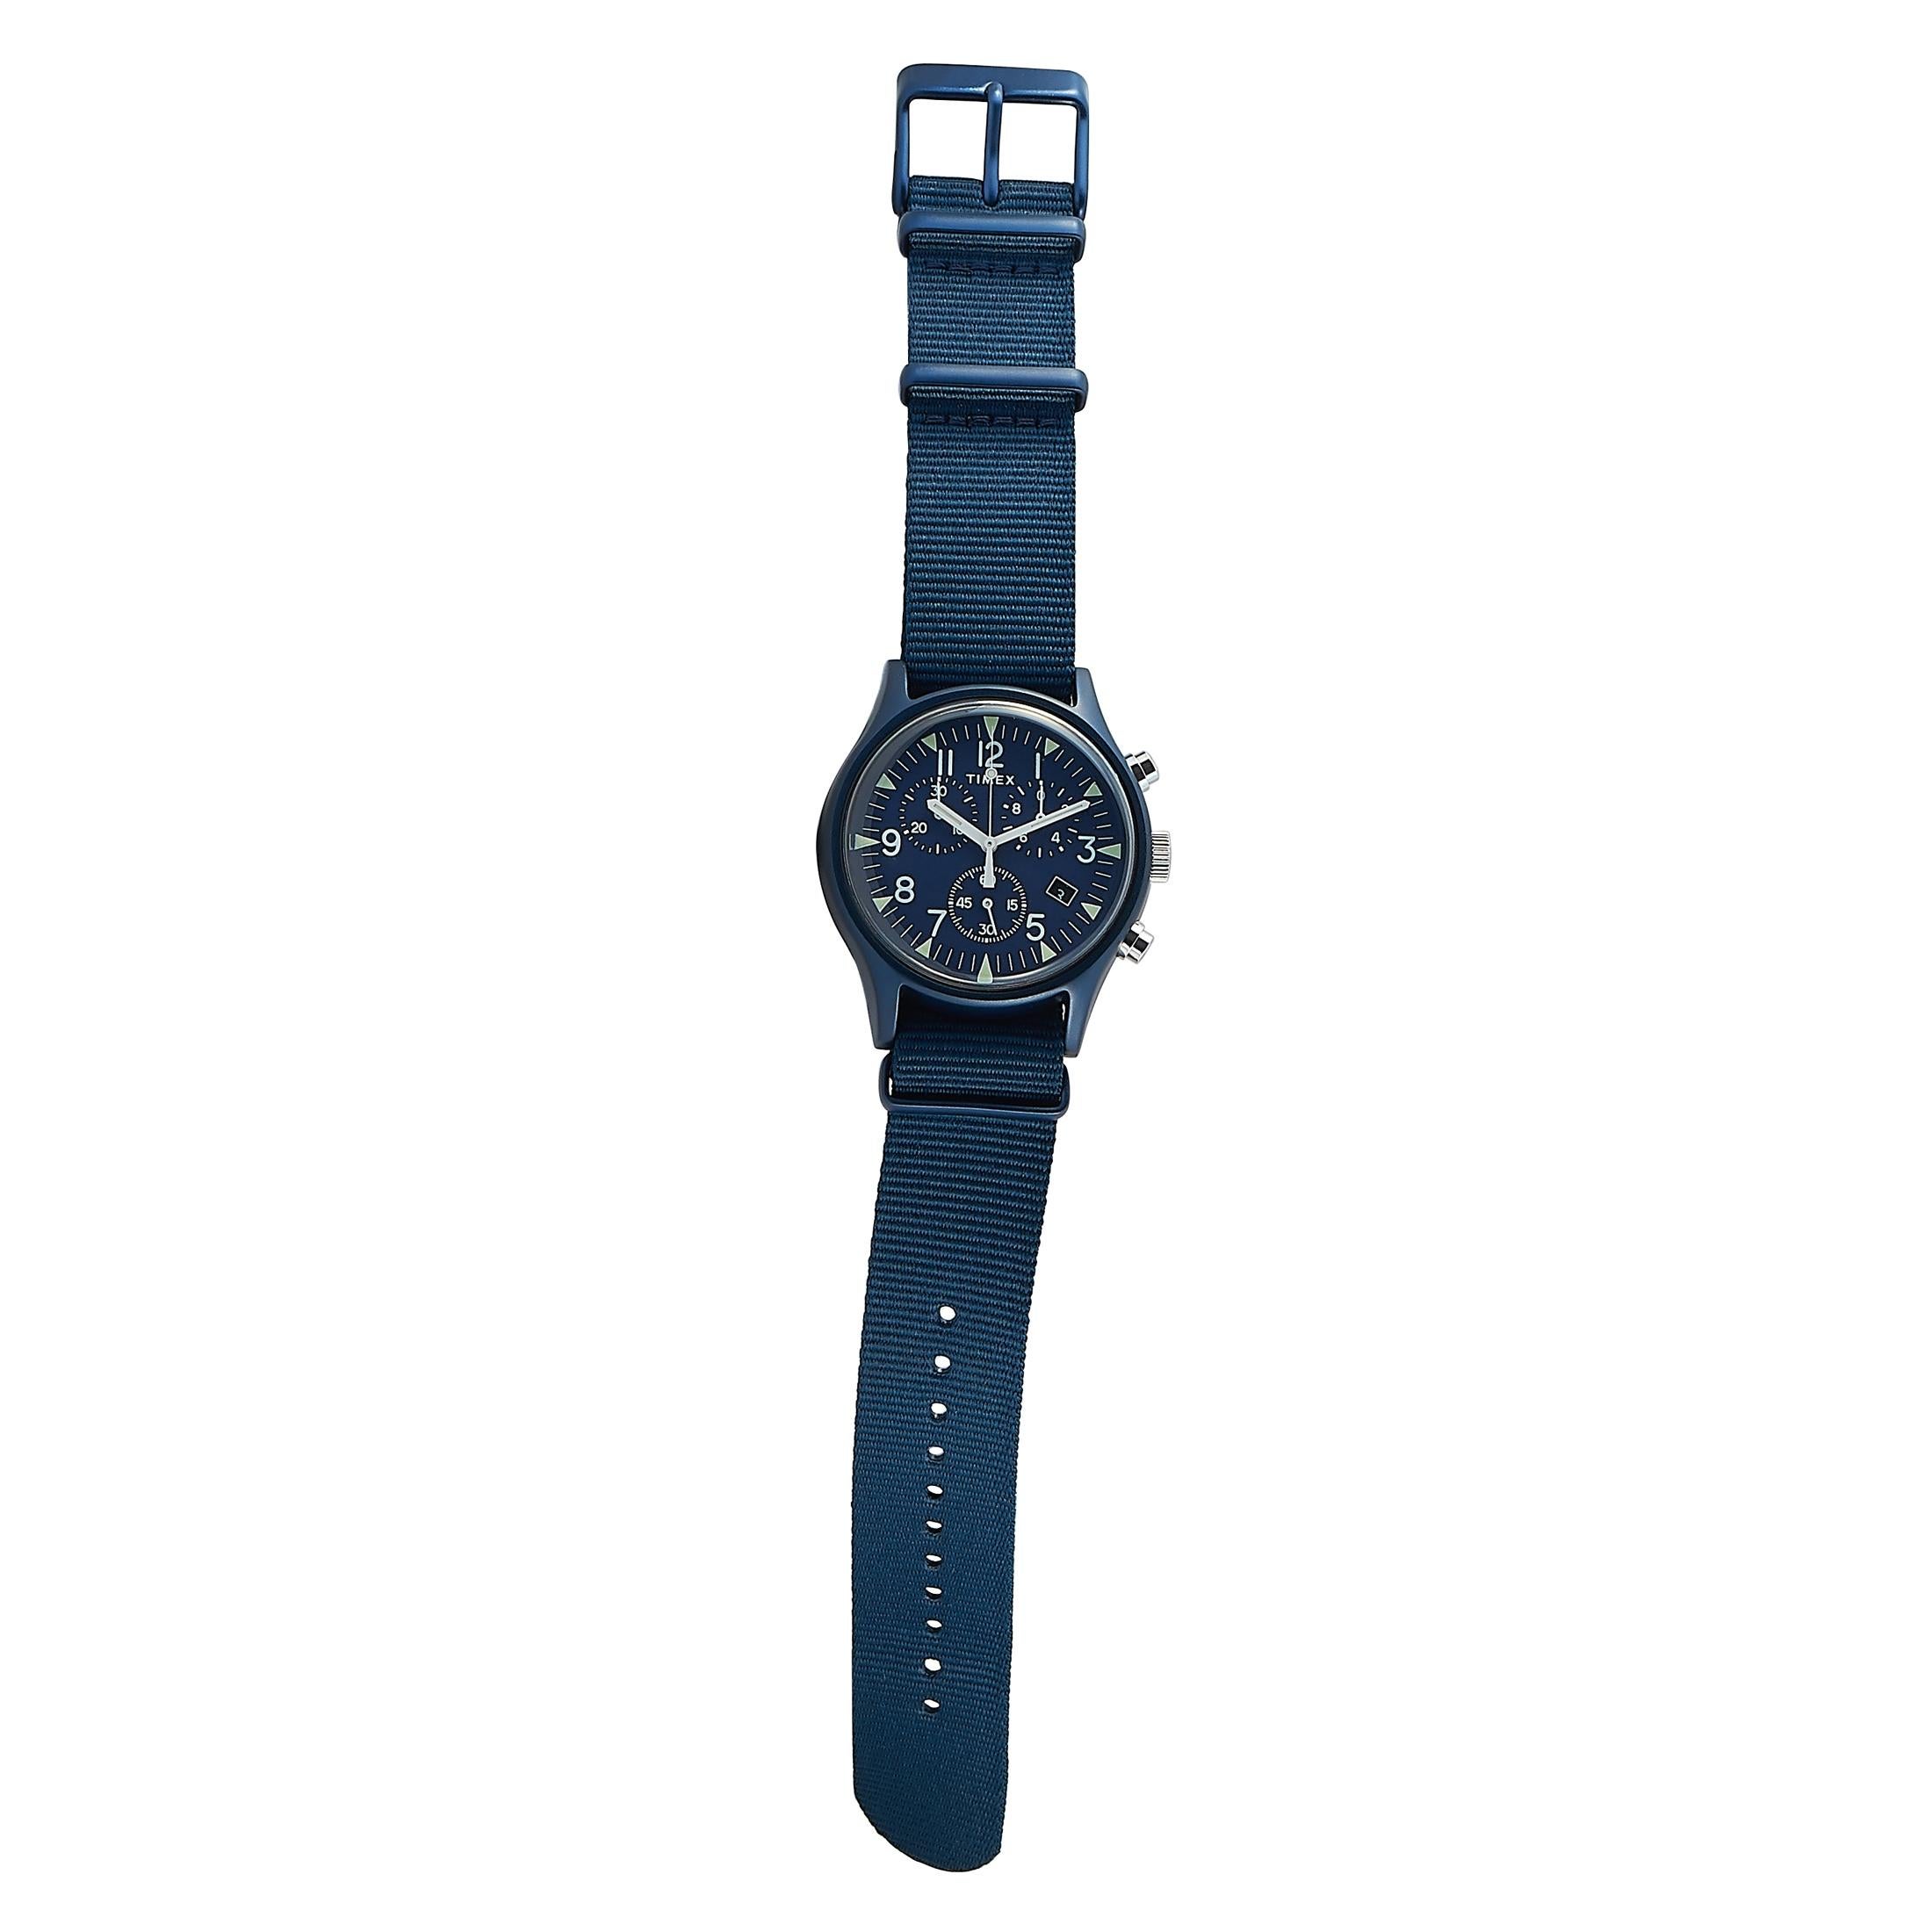 This is the Timex MK1 Aluminum Chronograph 40 mm watch, reference number TW2R67600.

It is presented with a blue aluminum case that boasts stainless steel back and offers water resistance of 30 meters. The case measures 40 mm in diameter and is